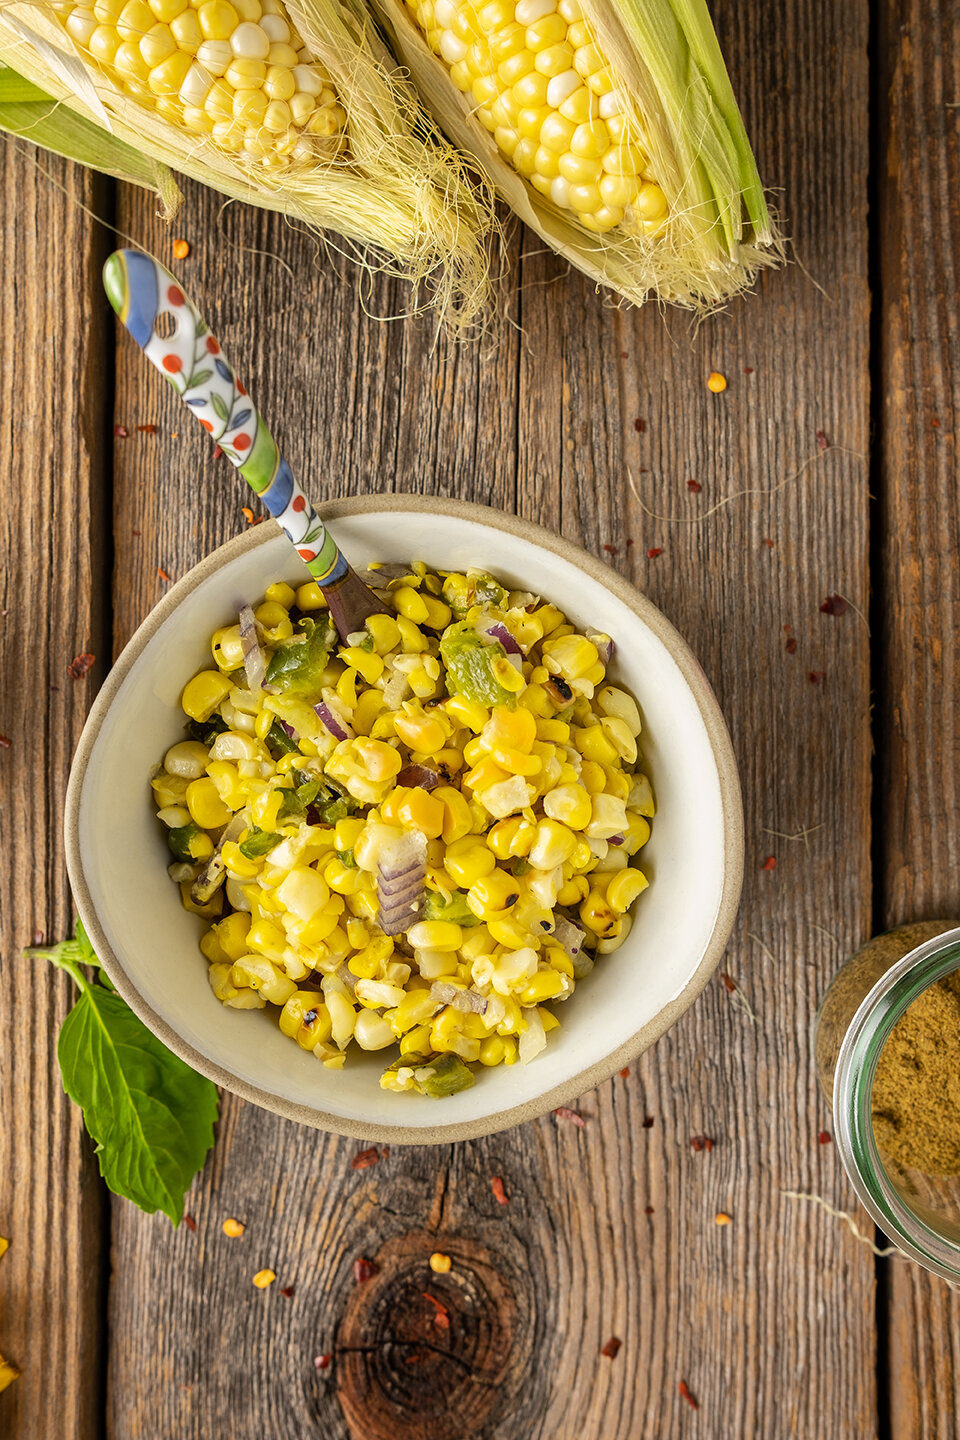  Small bowl of corn relish with colorful spoon and corn on the cob.  